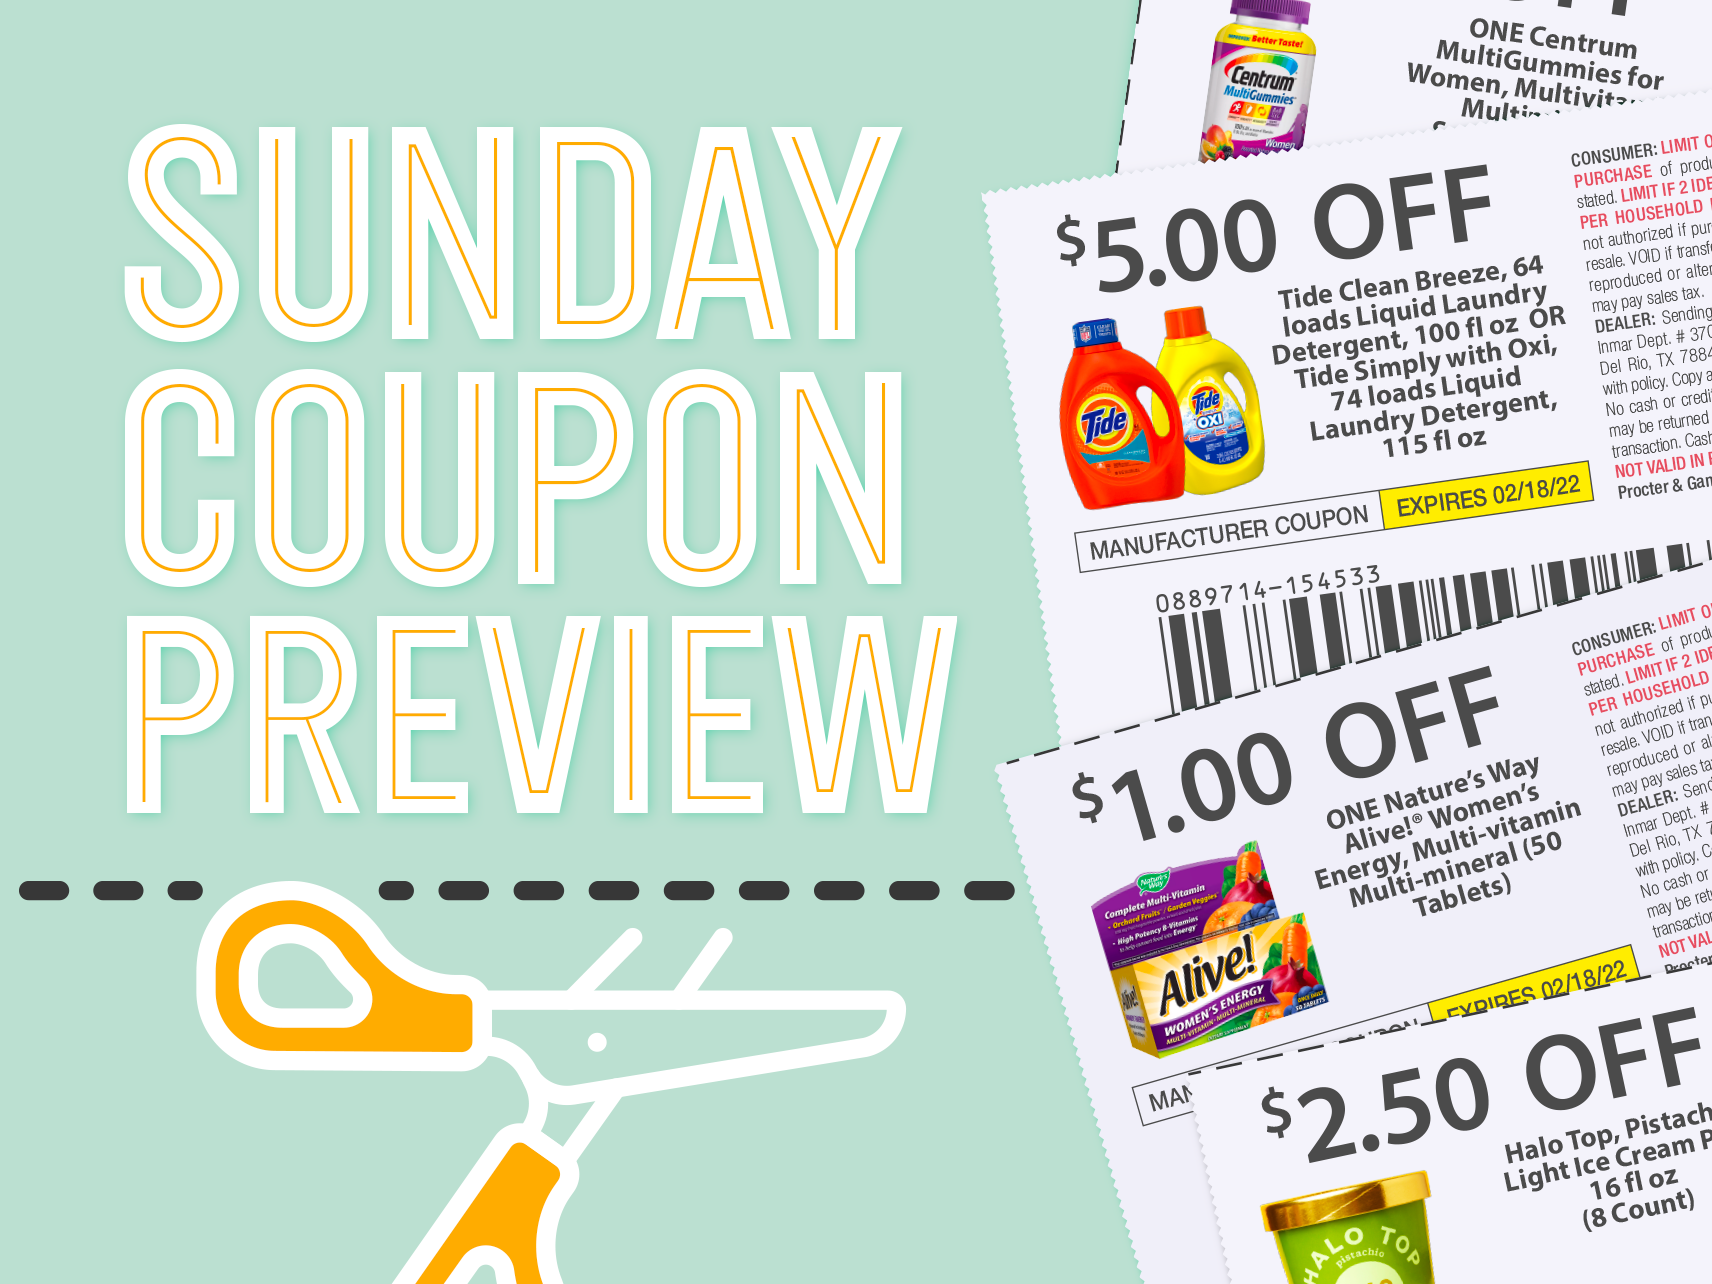 Sunday Coupon Preview For 1/1 – FOUR Inserts